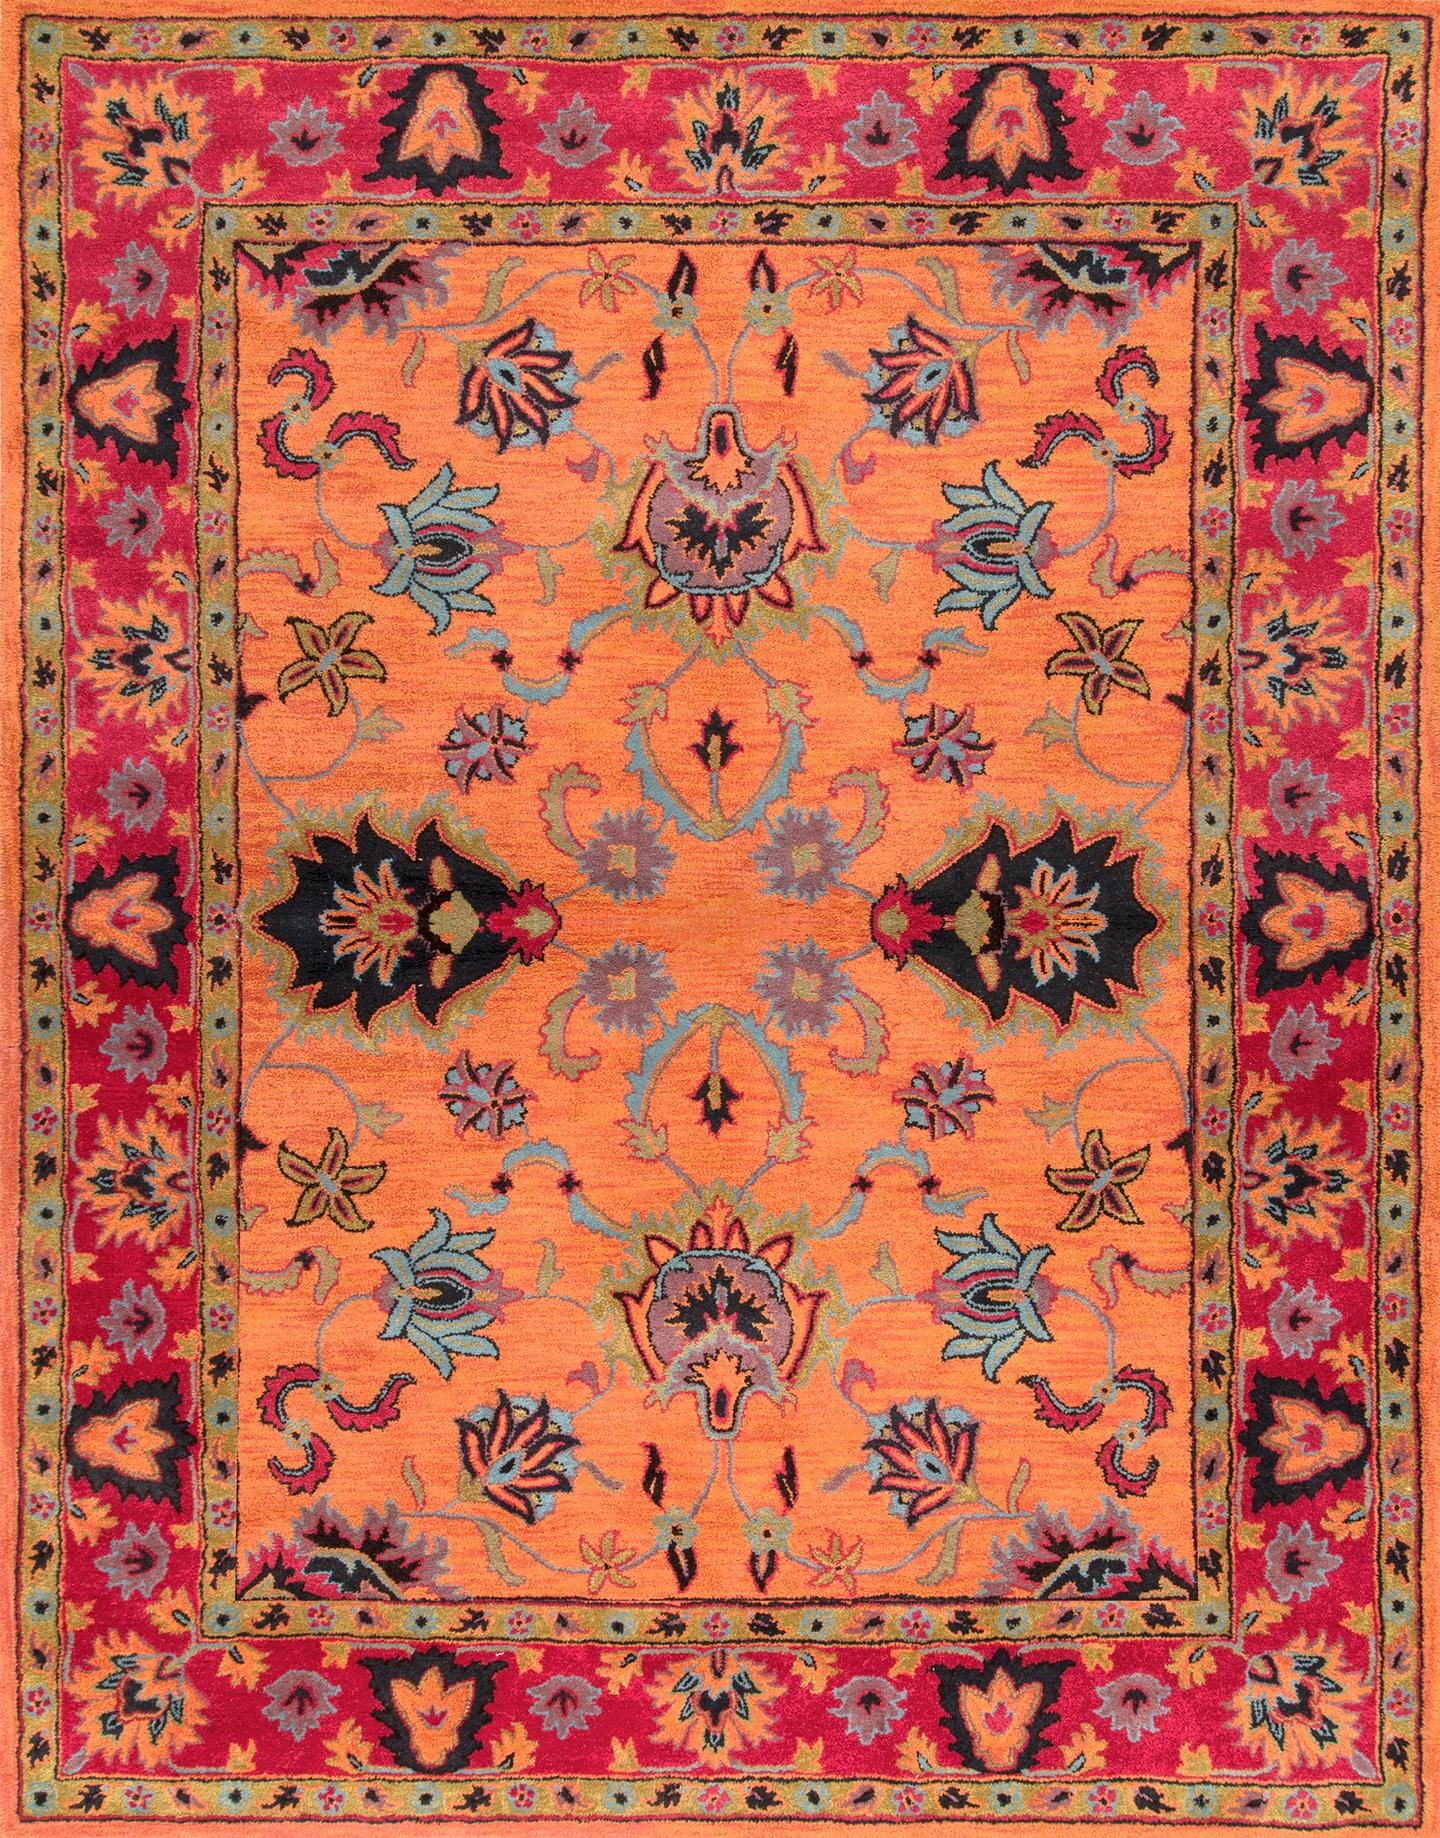 Hand Tufted Montesque Area Rug - Image 1